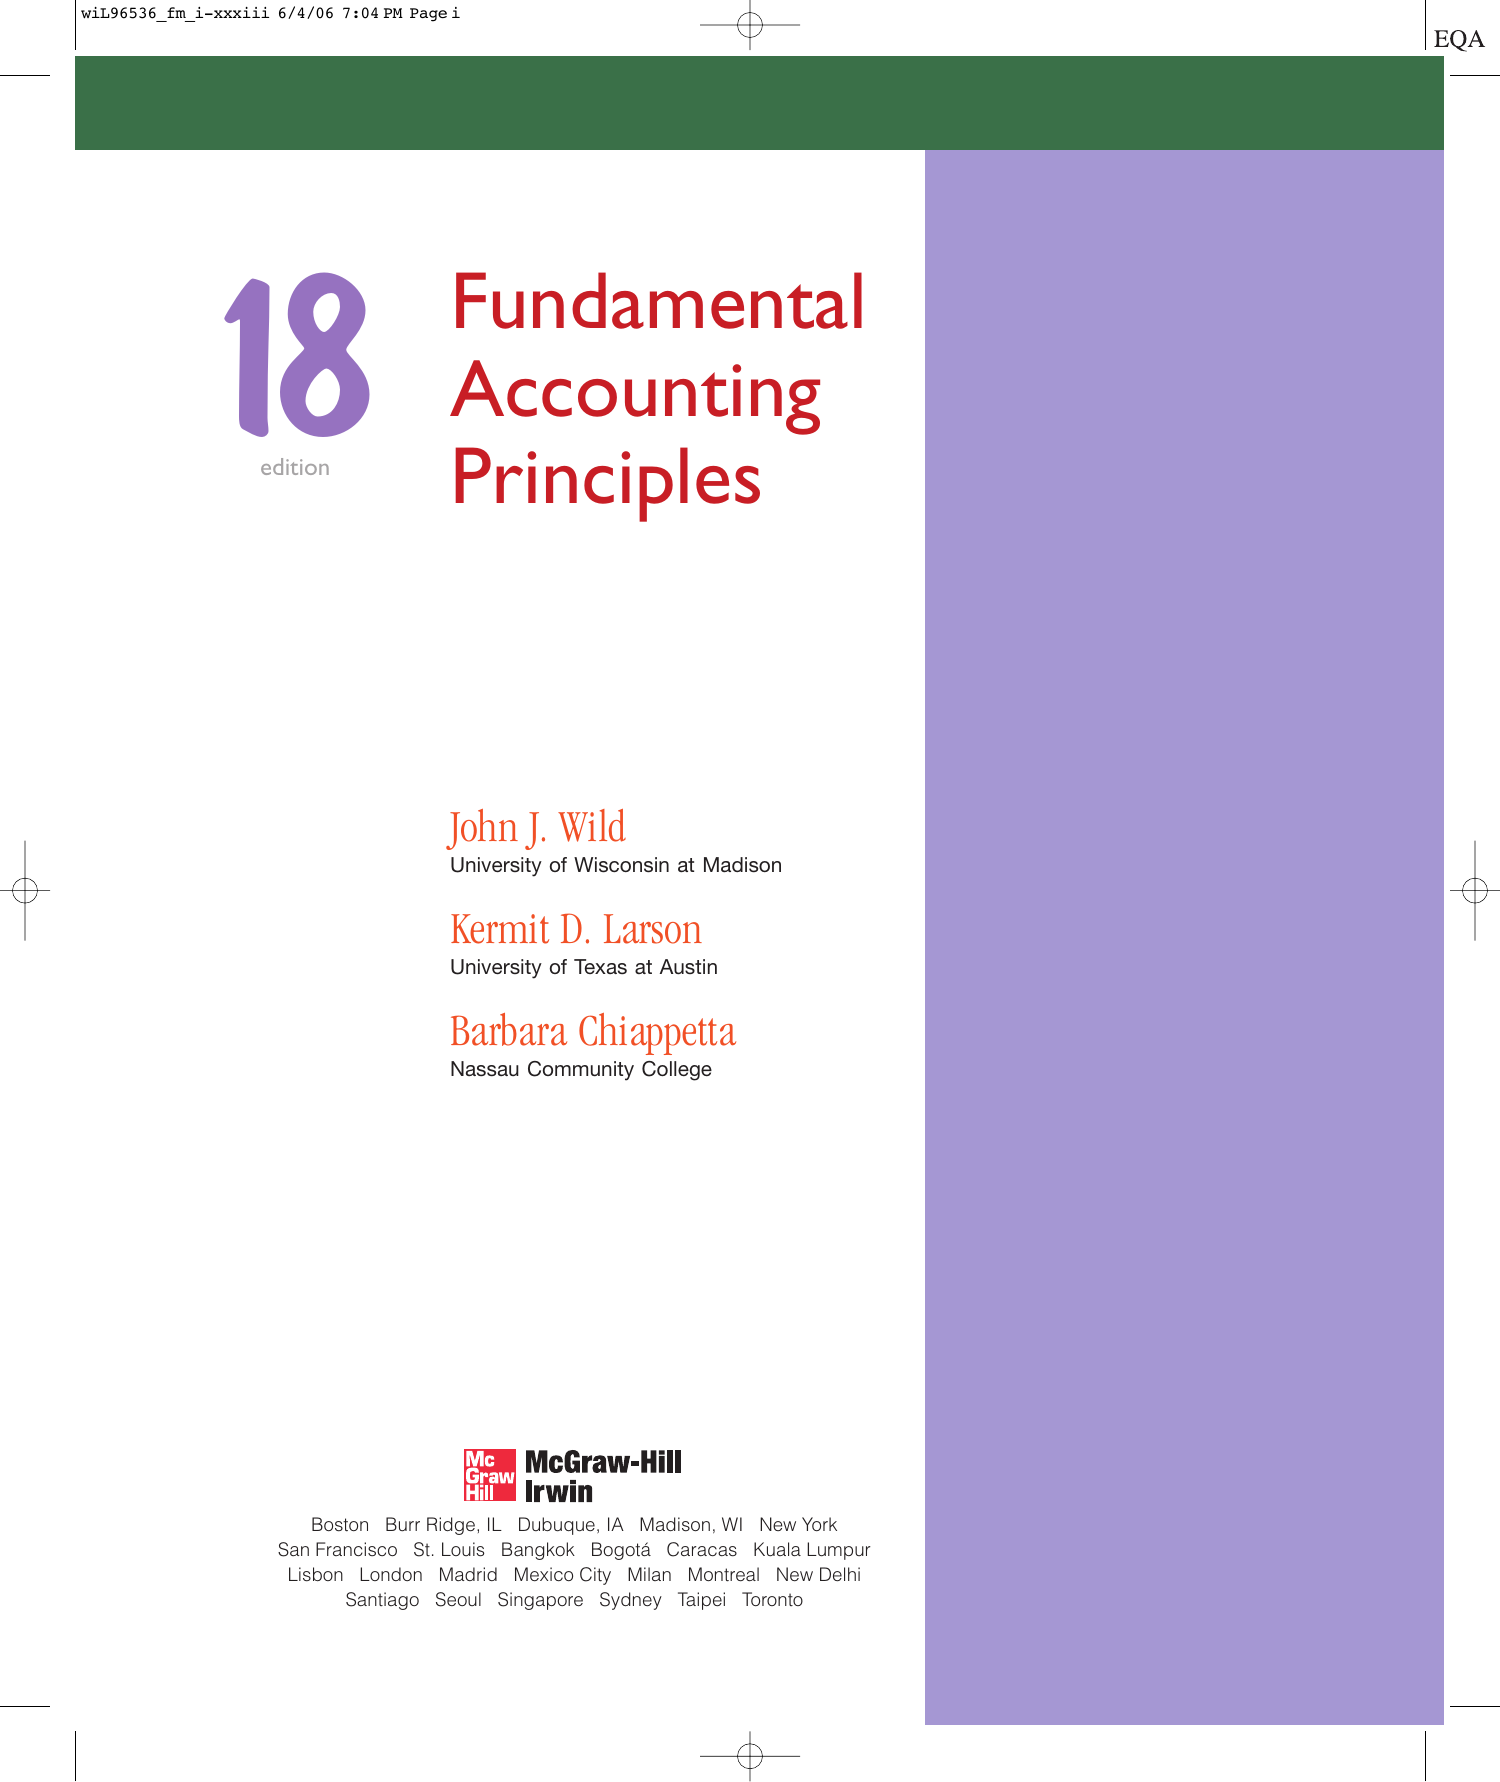 solution manual for fundamental accounting principles 20th edition by wild